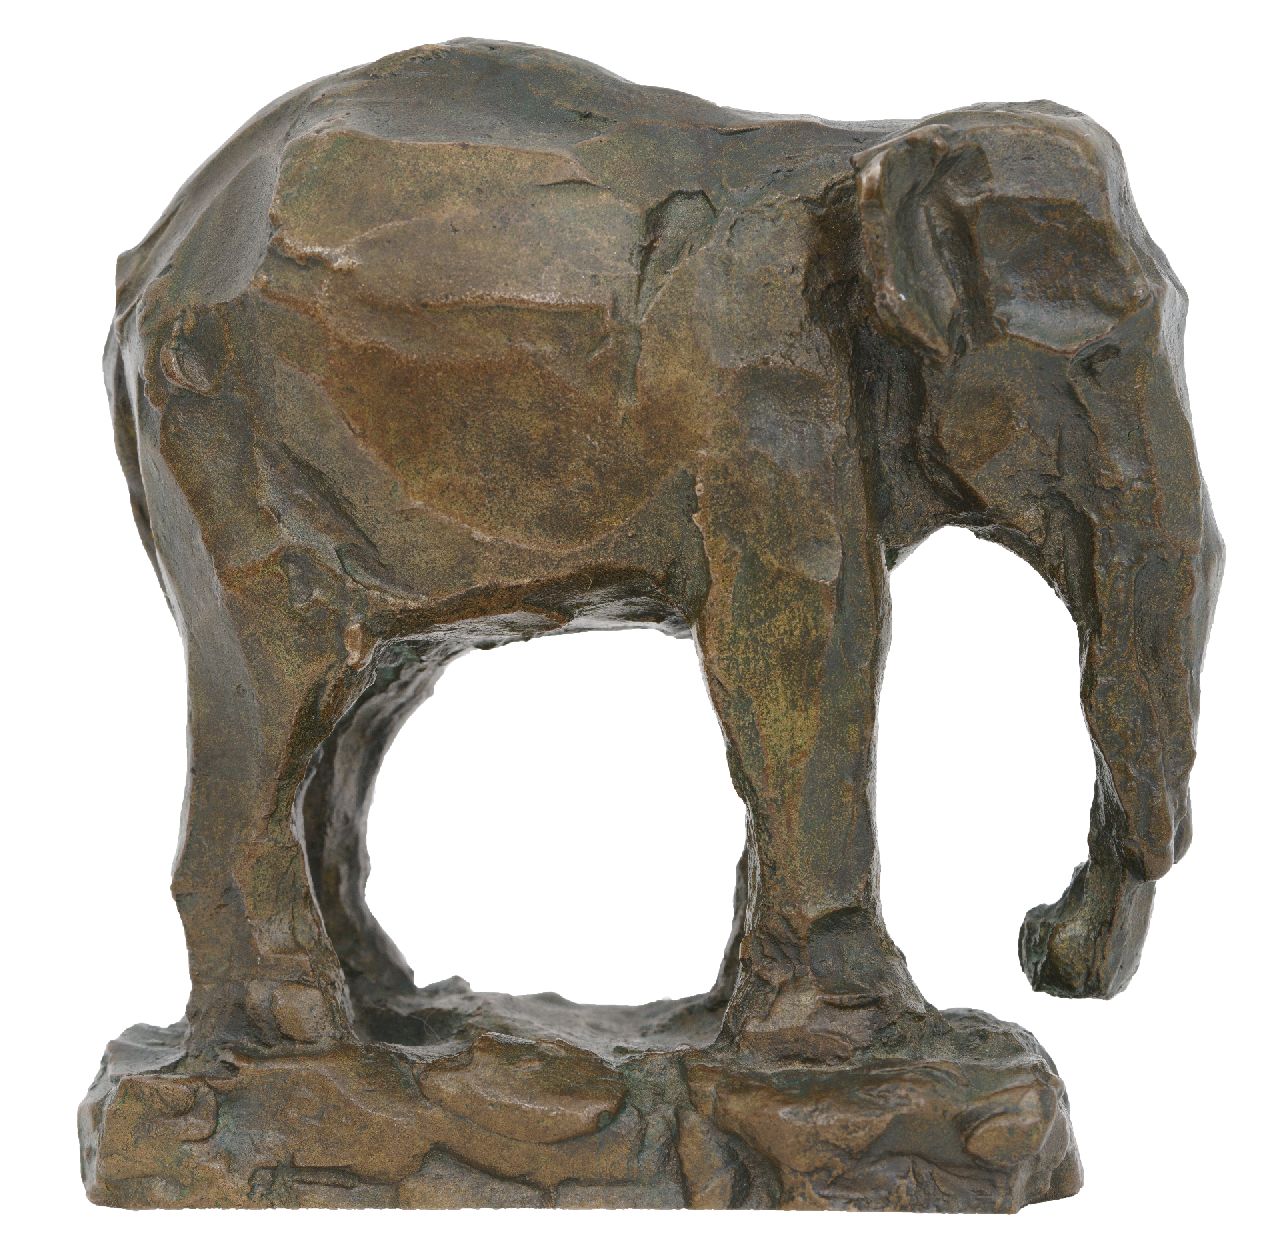 Zijl L.  | Lambertus Zijl | Sculptures and objects offered for sale | Elephant, bronze 11.0 x 11.0 cm, signed with initials on the side of the base and dated '18